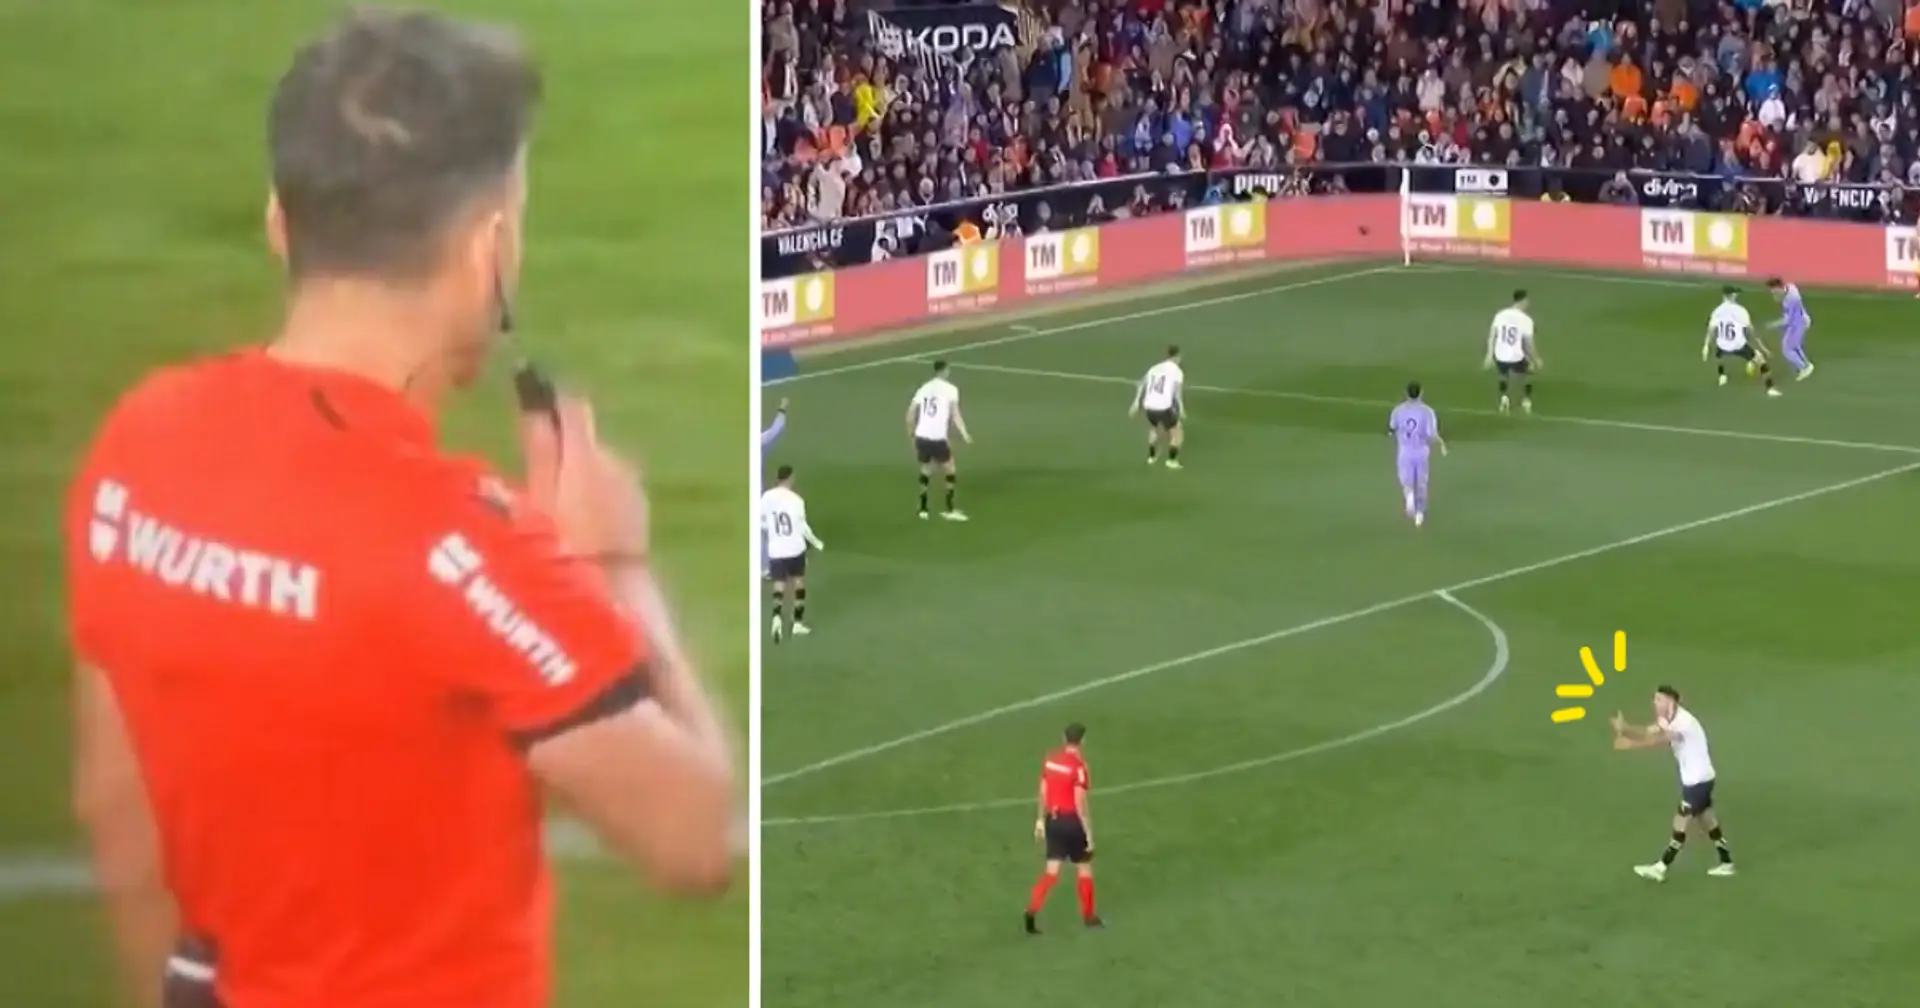 Caught on camera: Valencia player puts pressure on referee to blow final whistle and stop Real Madrid